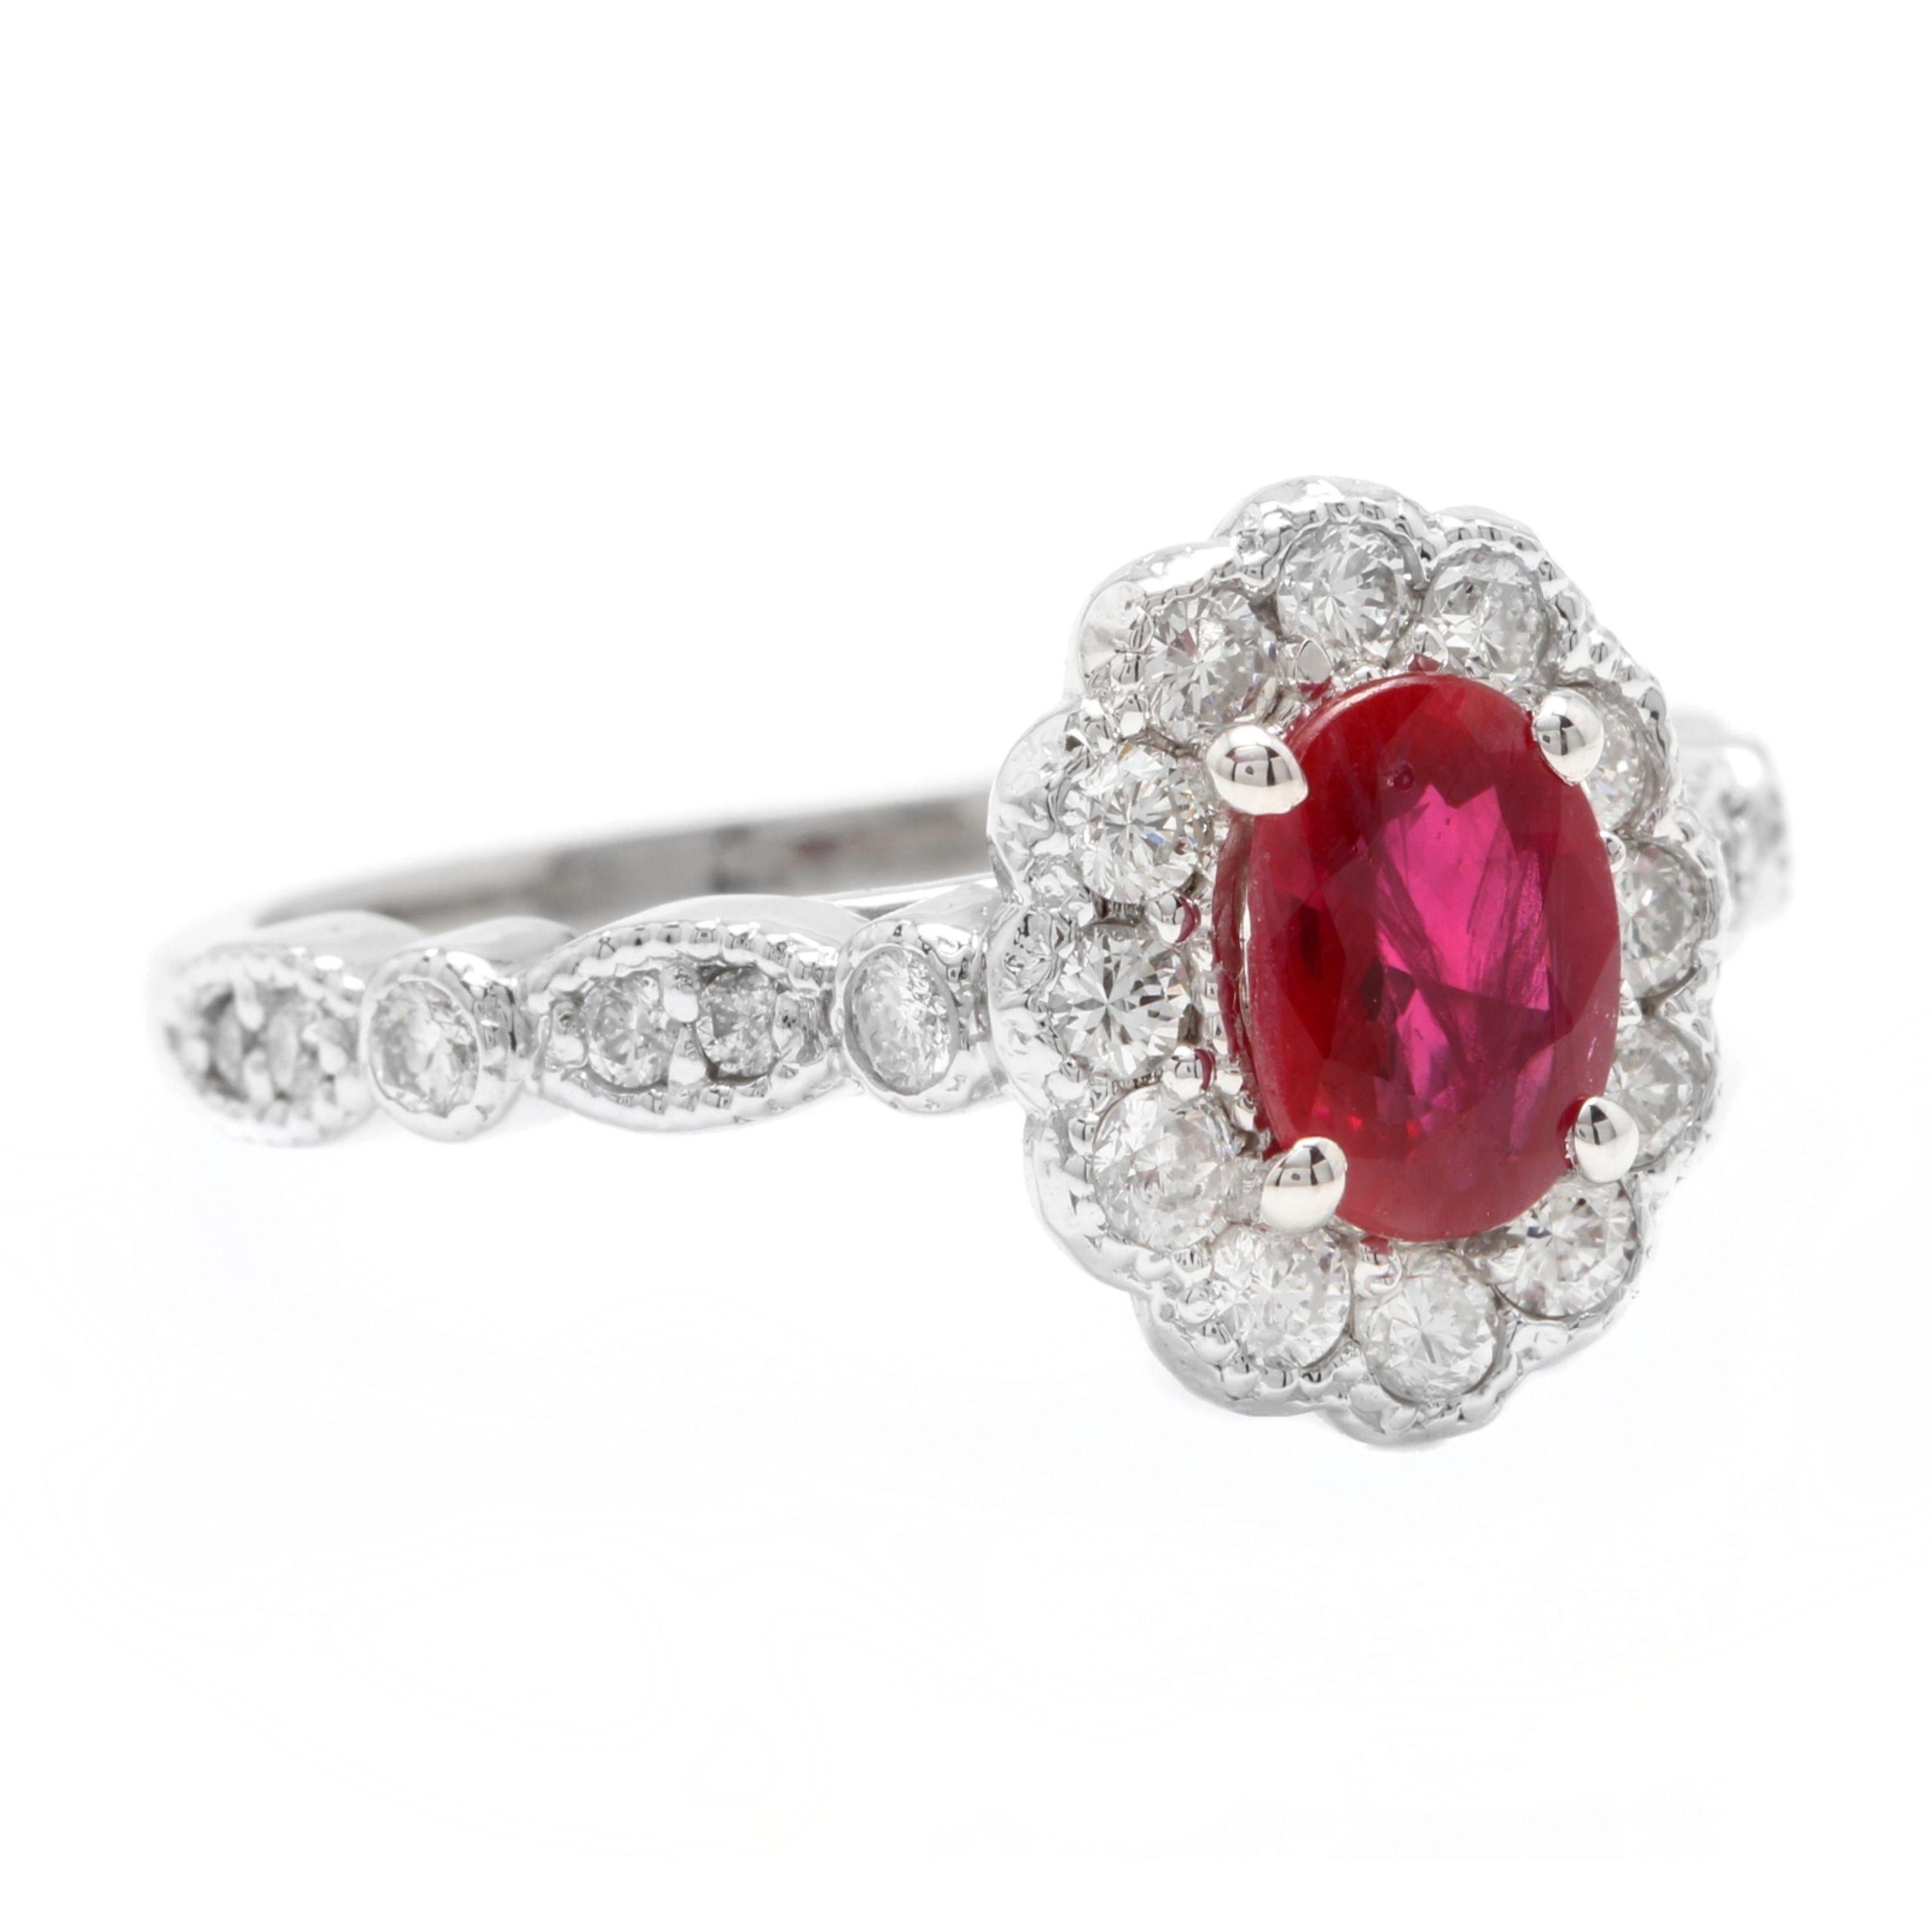 1.60 Carats Impressive Natural Red Ruby and Diamond 14K White Gold Ring

Total Natural Red Ruby Weight is Approx. 1.00 Carats

Ruby Measures: Approx. 7.00 X 5.00mm

Natural Round Diamonds Weight: Approx. 0.60 Carats (color G-H / Clarity